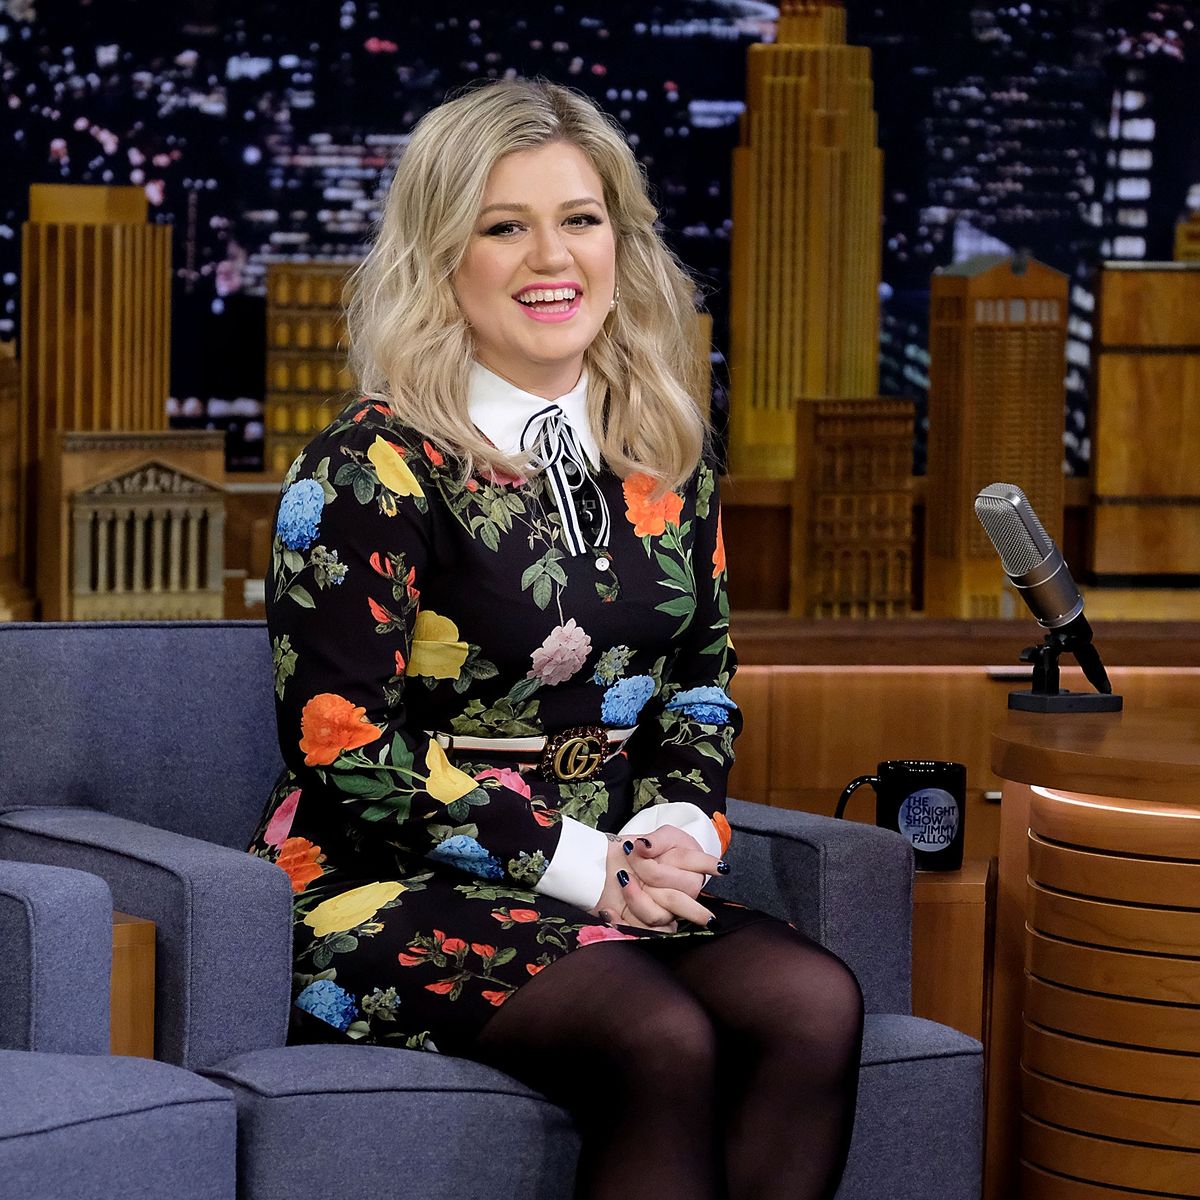 Kelly Clarkson Visits "The Tonight Show Starring Jimmy Fallon"